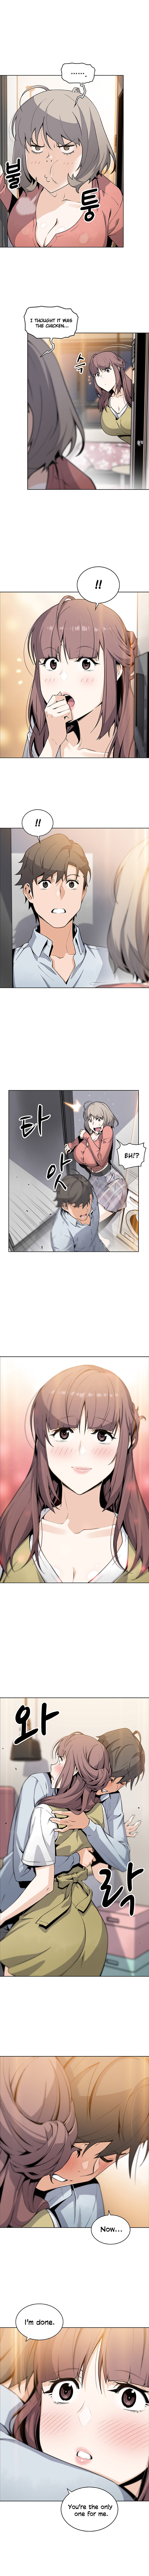 Housekeeper Manhwa - Chapter 47 Page 2